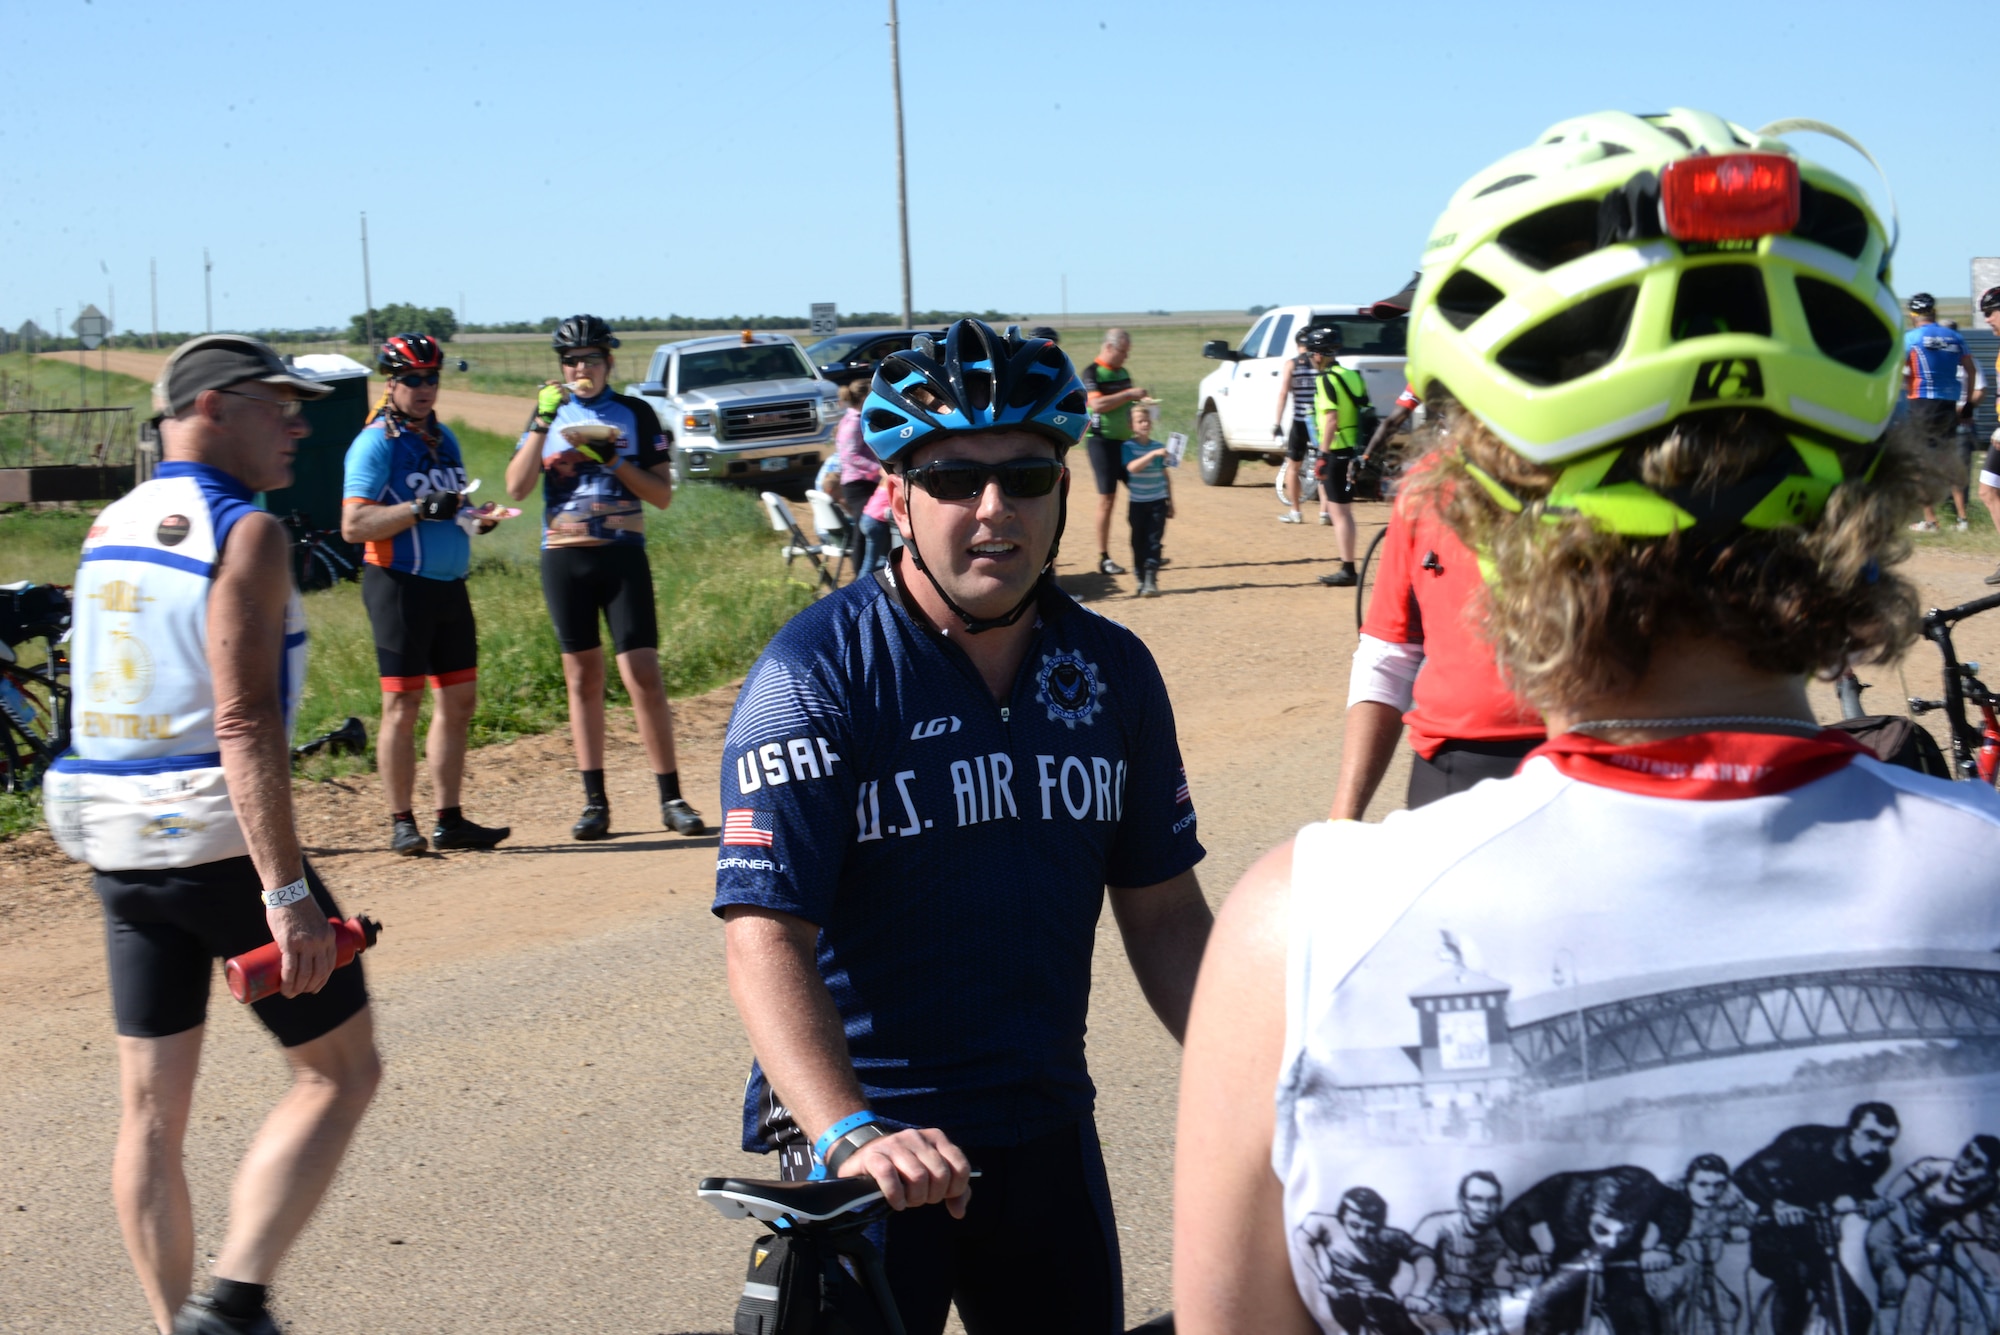 Maj. Anthony Bares, the director of wing inspections assigned to the 28th Bomb Wing Inspector General office, speaks with participants of the Ride Across South Dakota off Highway 44, S.D., June 4, 2017. Bares took up cycling in 2004 as a way to train for triathlons, and leads the Dakota Regional Air Force Cycling Team. (U.S. Air Force photo by Airman 1st Class Thomas Karol)